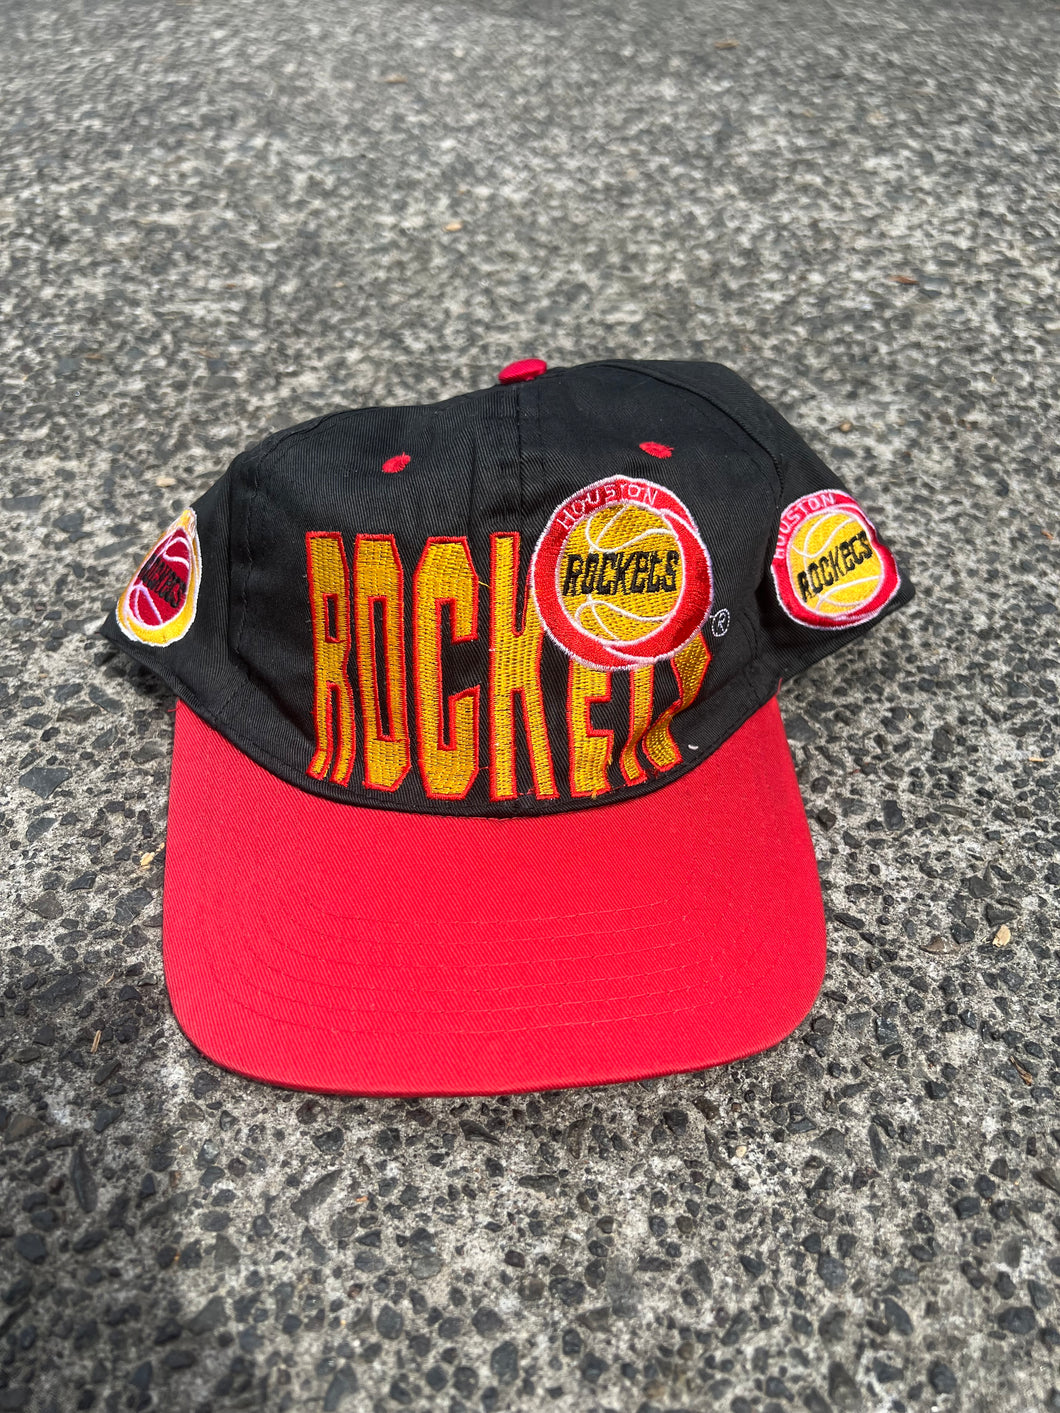 NBA - 90'S VINTAGE HOUSTON ROCKETS HAT - ONE SIZE FITS ALL OSFA